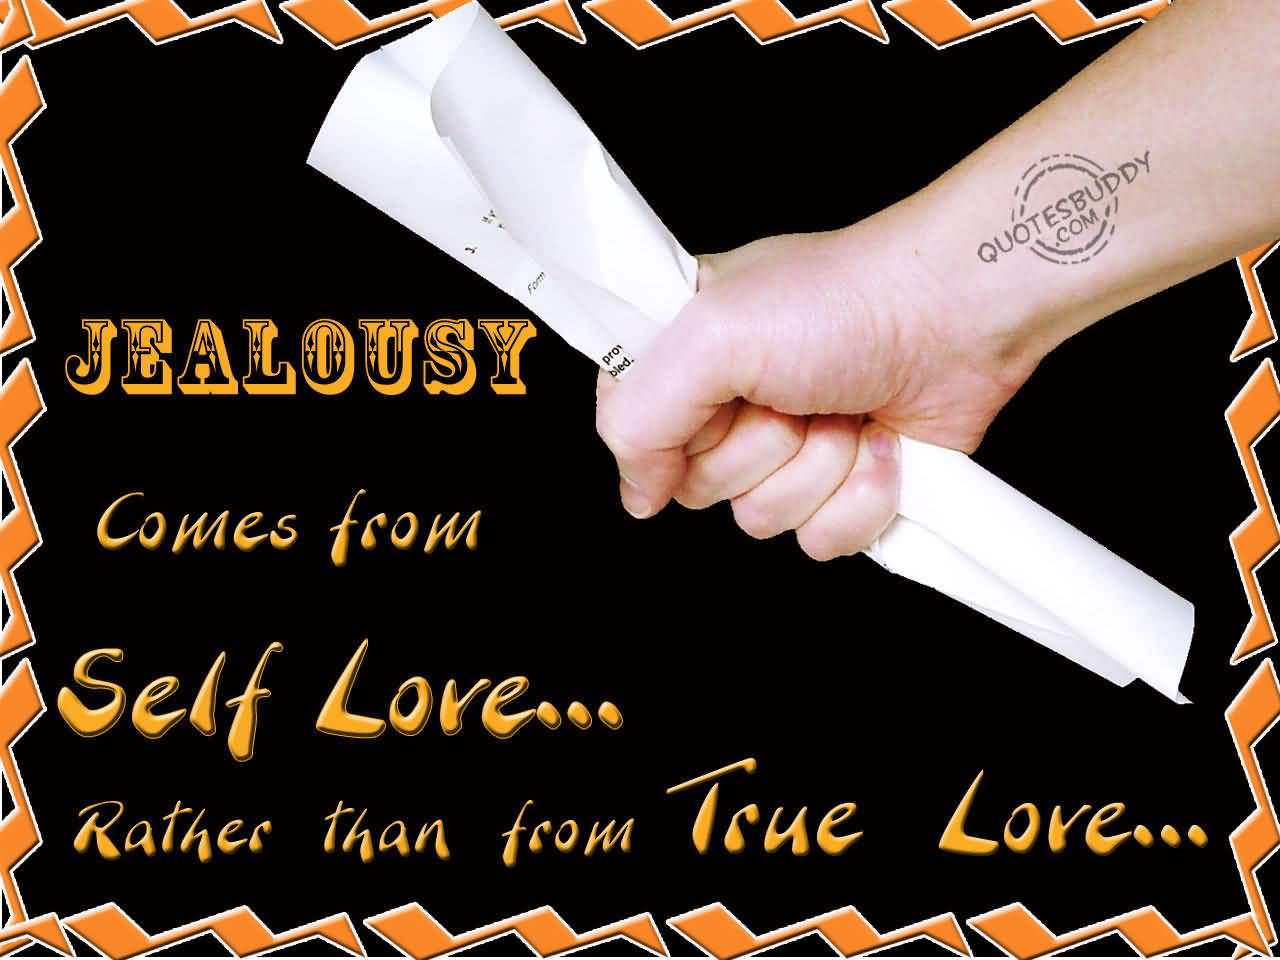 Jealousy comes from self-love rather than from true love. - Iris Murdoch